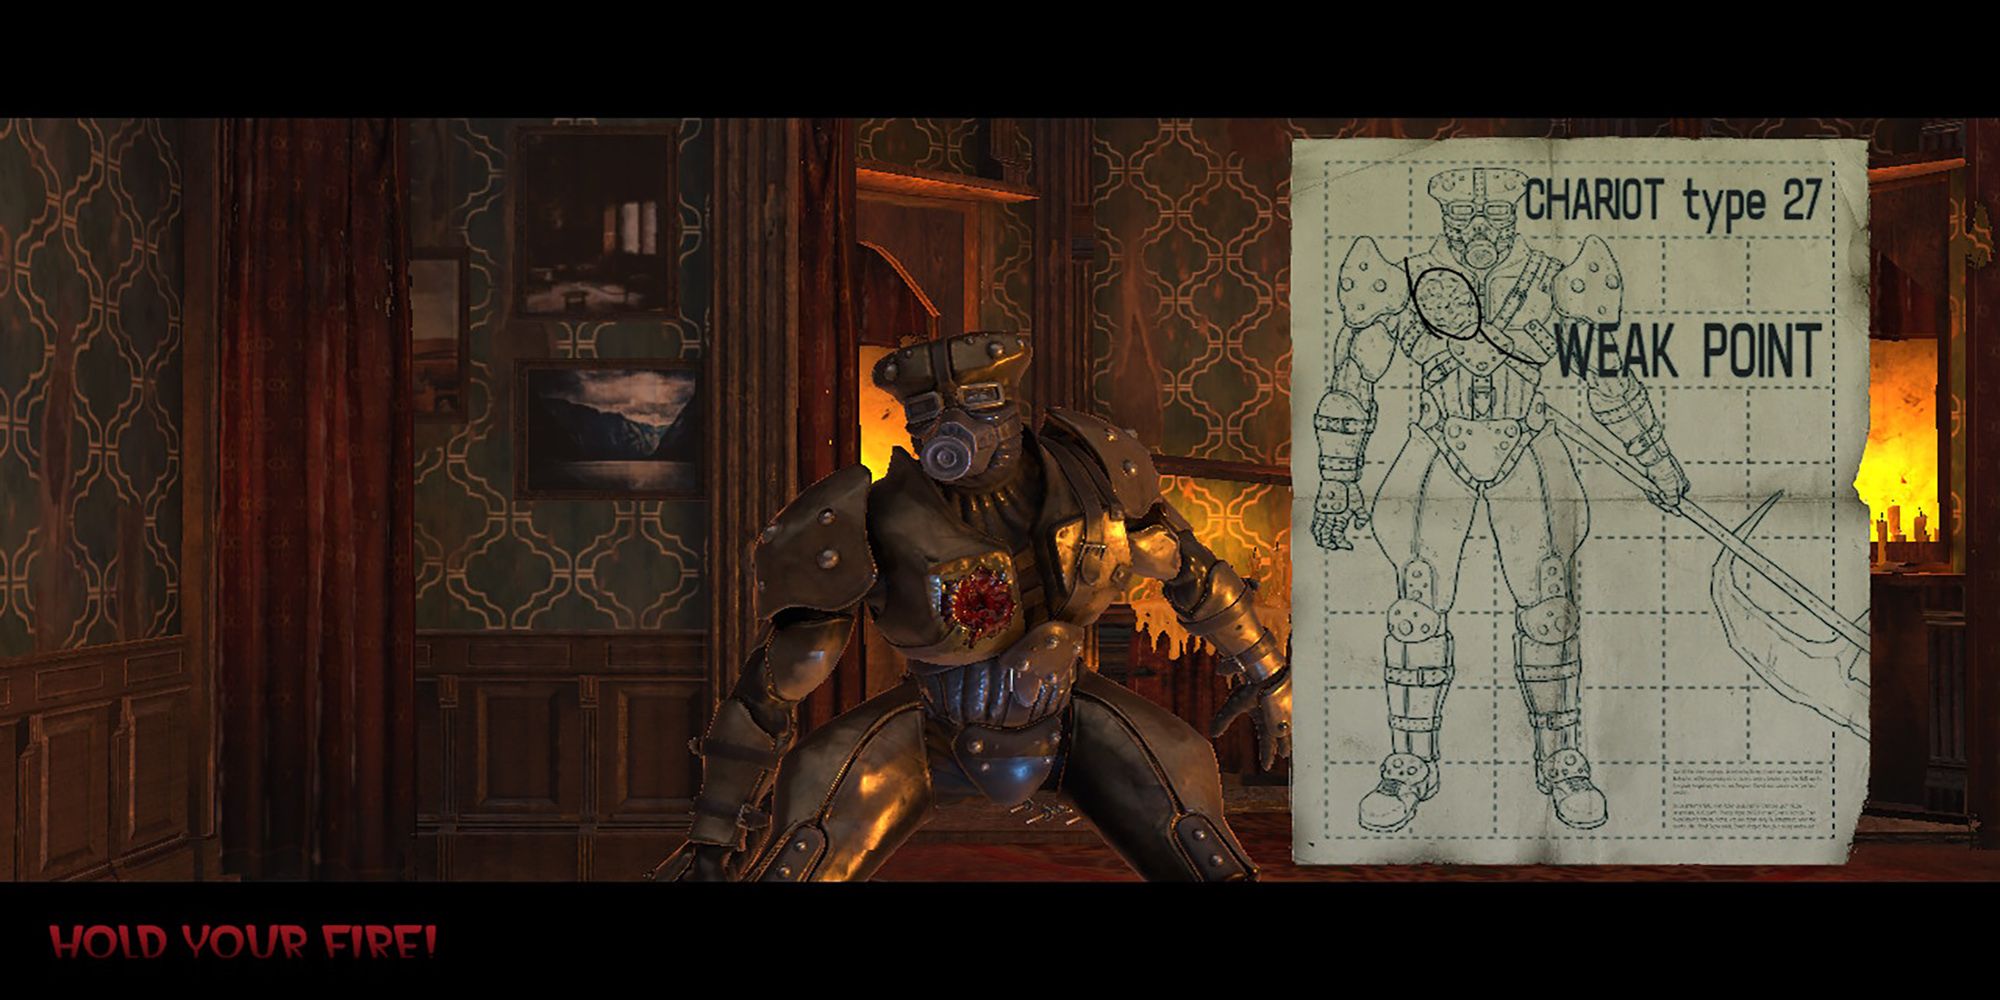 Introduction to the armored Chariot, along with his weak point diagram, in The House Of The Dead: Remake.